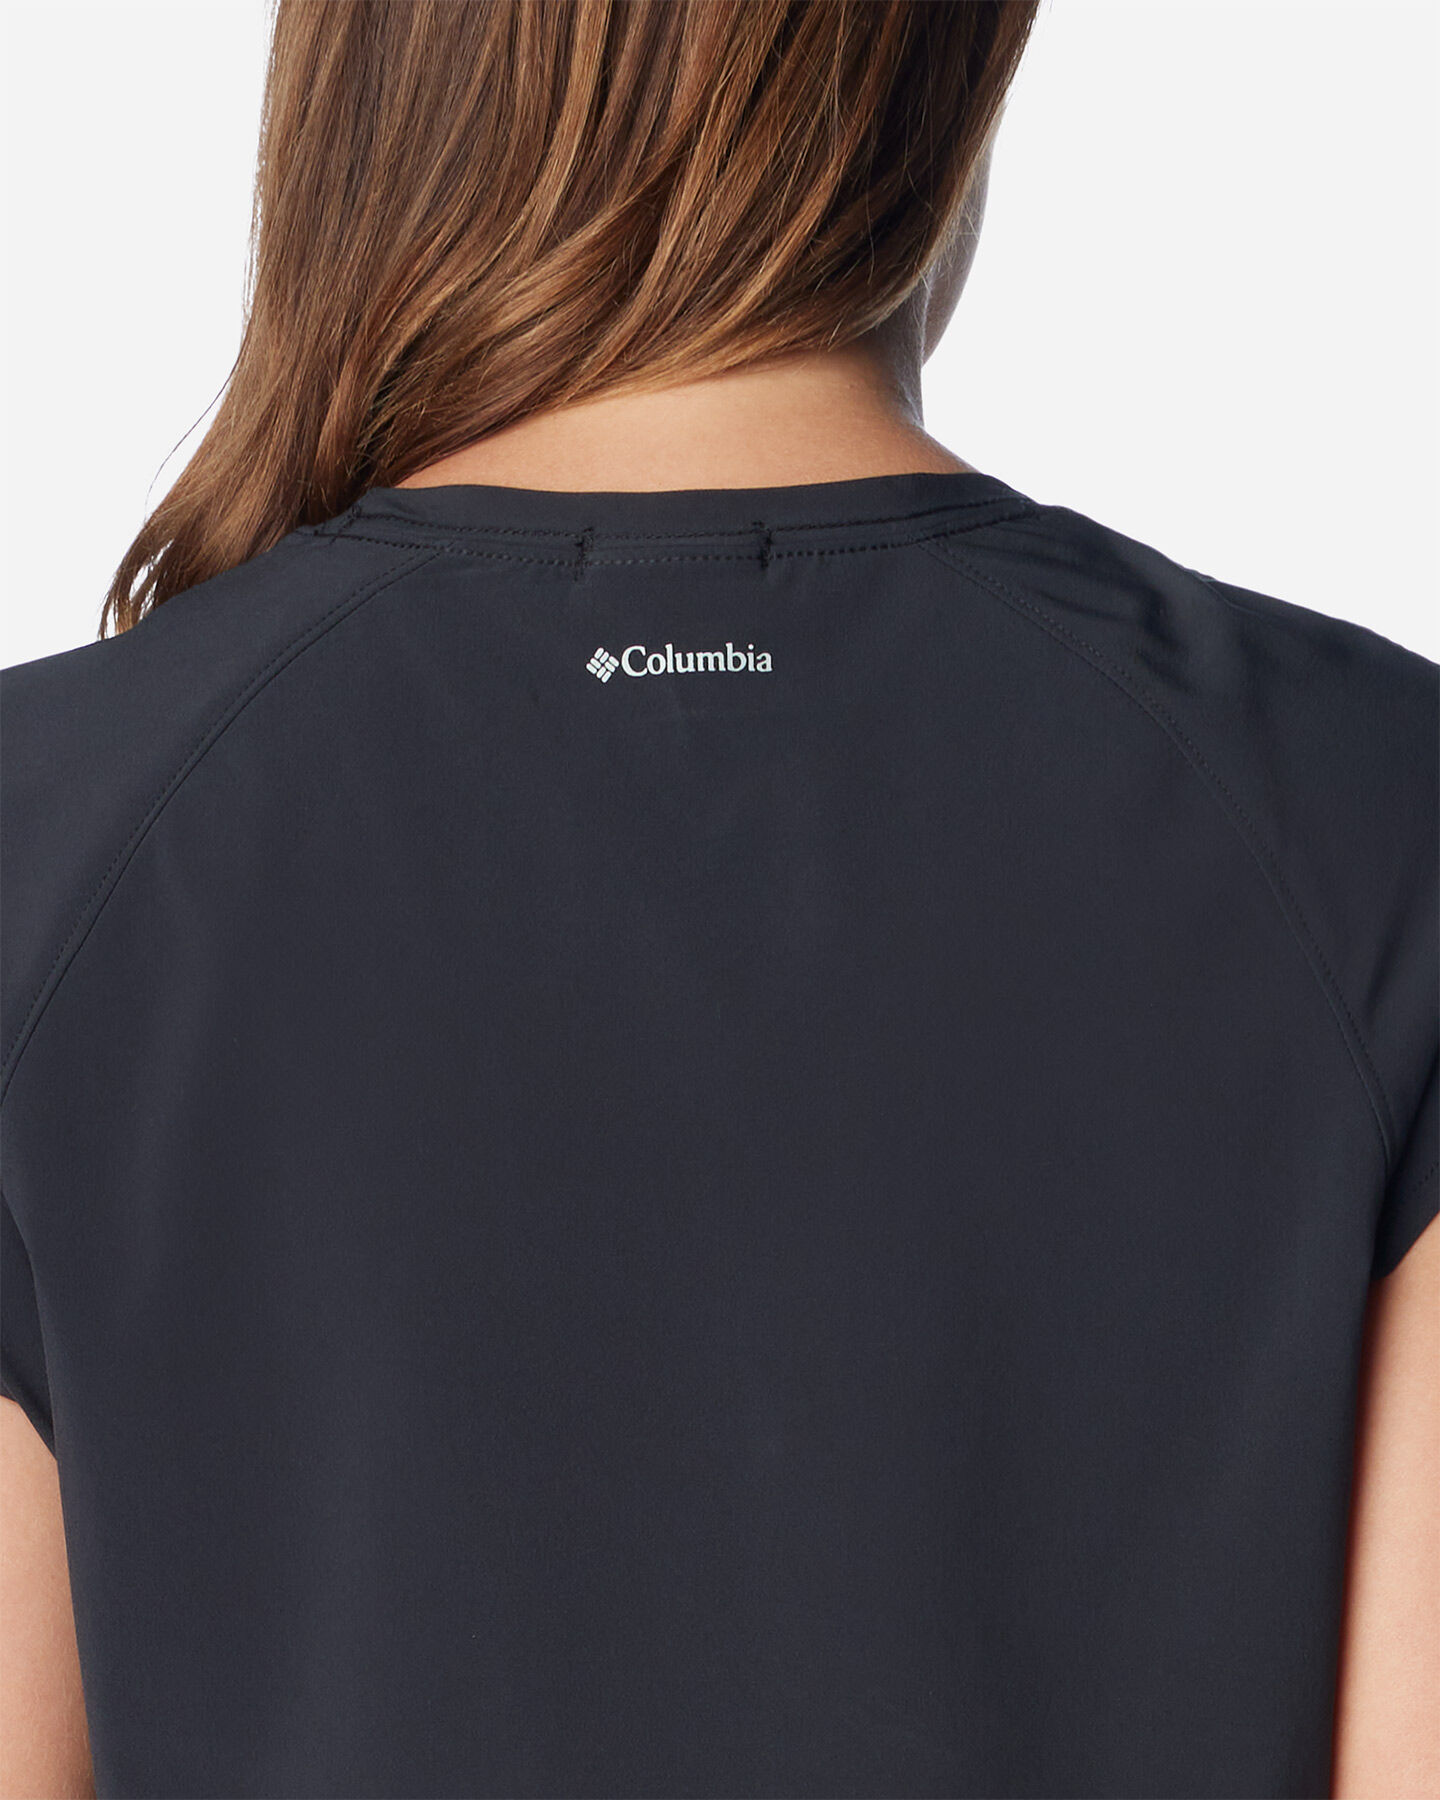  T-Shirt COLUMBIA BOUNDLESS BEAUTY W S5648780|010|XS scatto 4